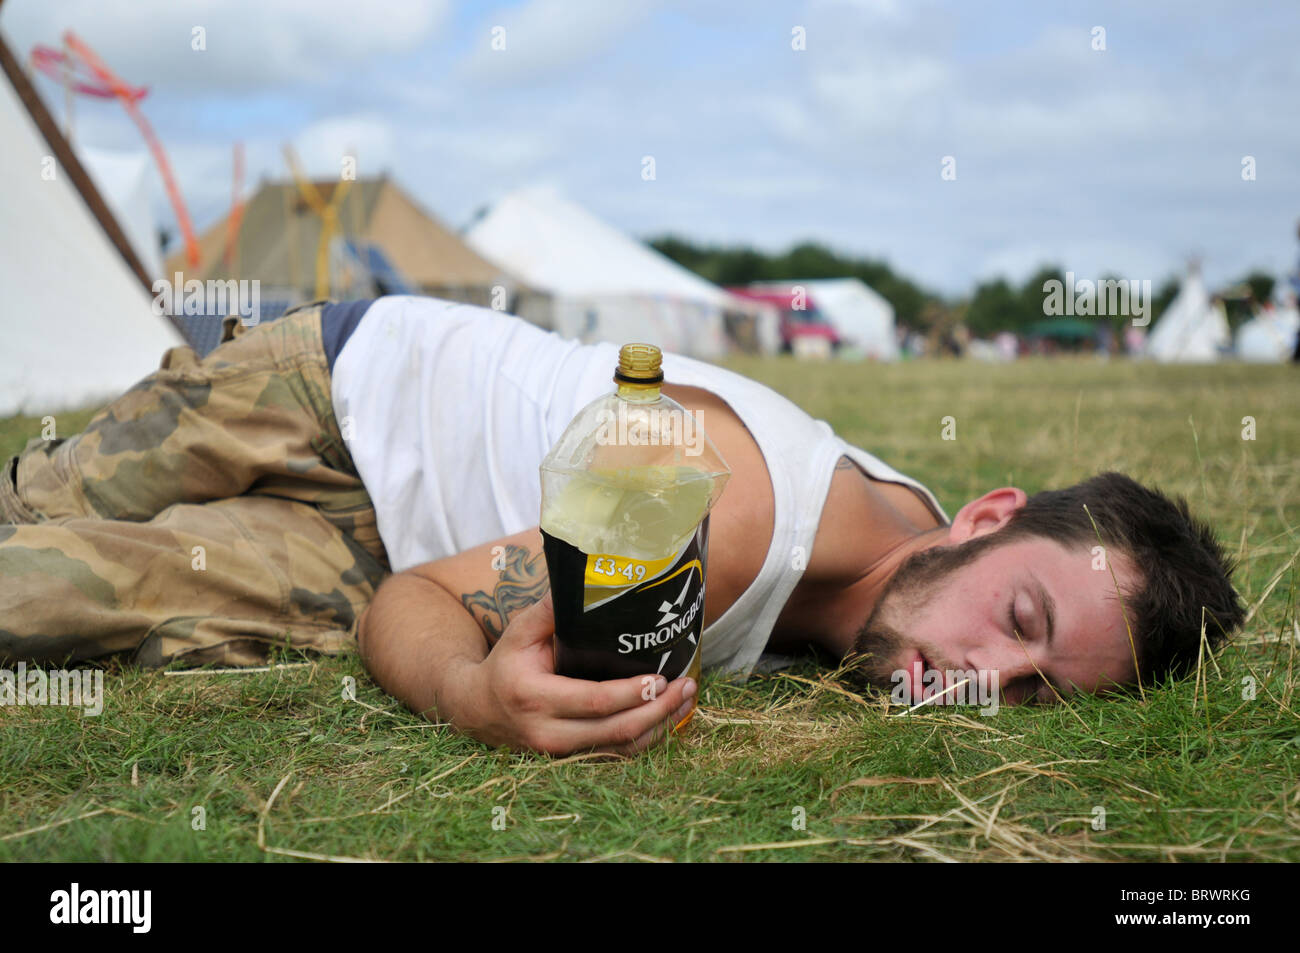 A festival goer in Cornwall, UK succumbs to alcohol Stock Photo